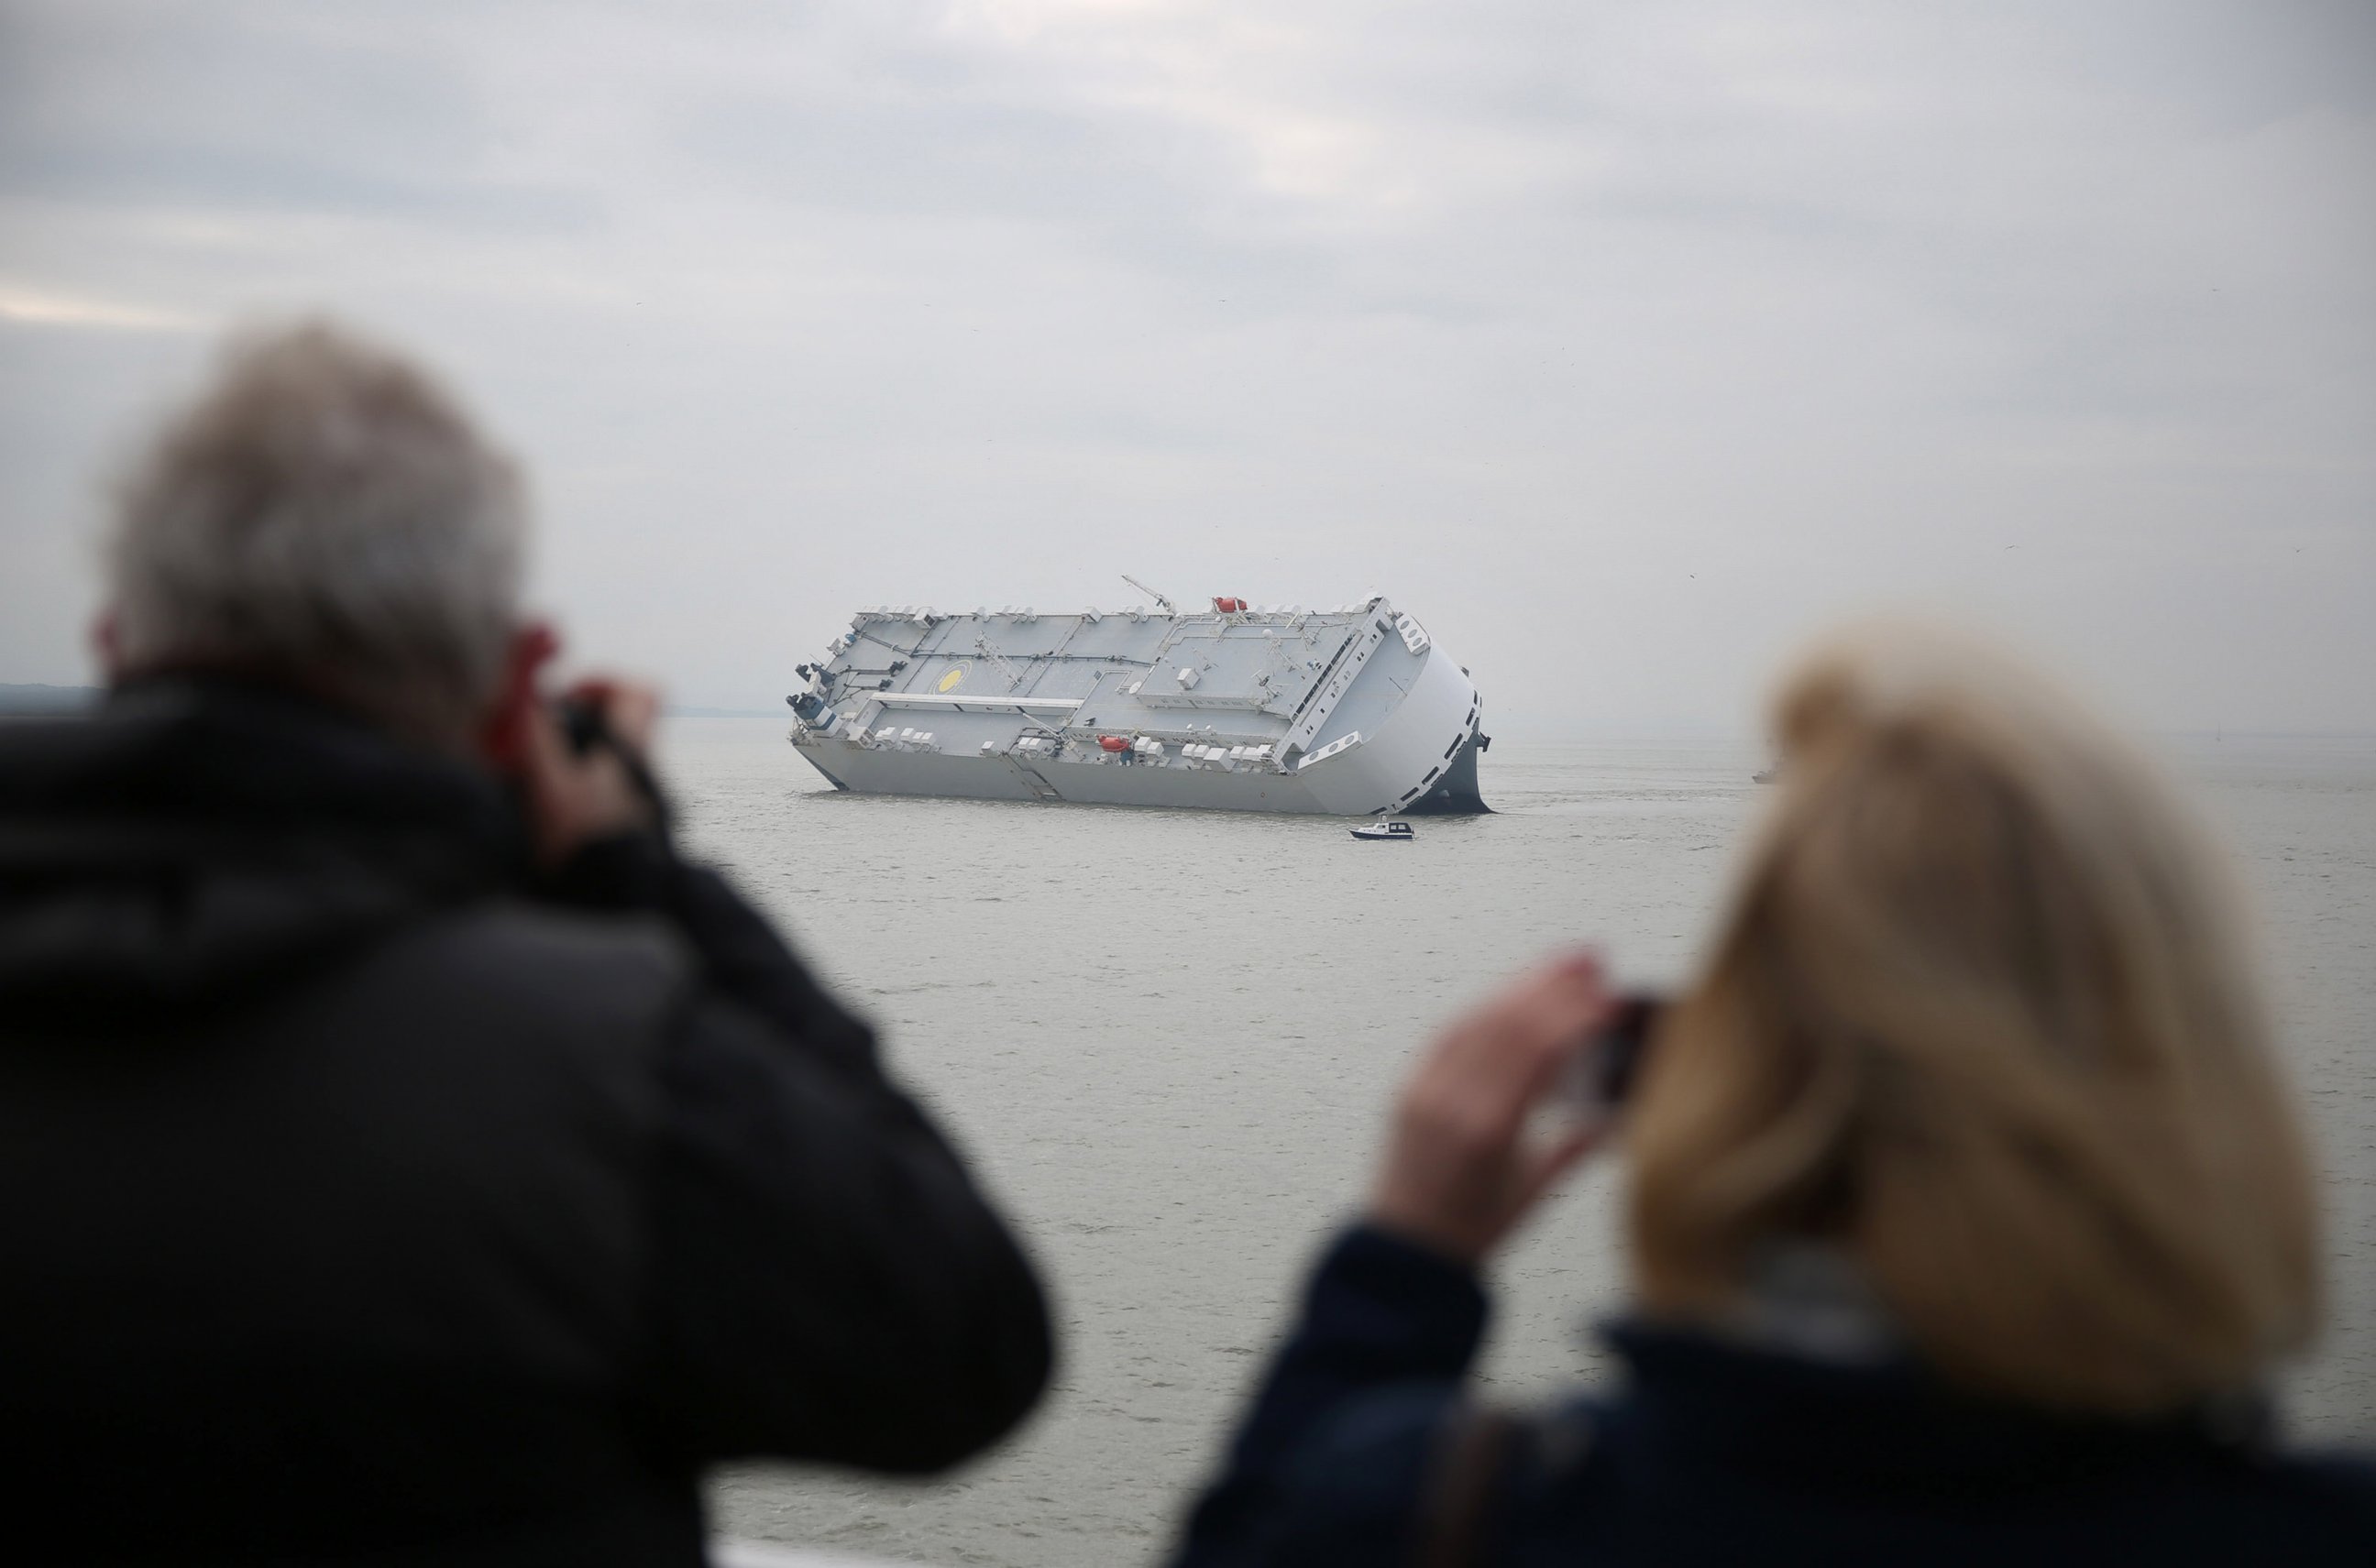 PHOTO: Passengers on a passing car ferry take photographs of the Hoegh Osaka after it ran aground